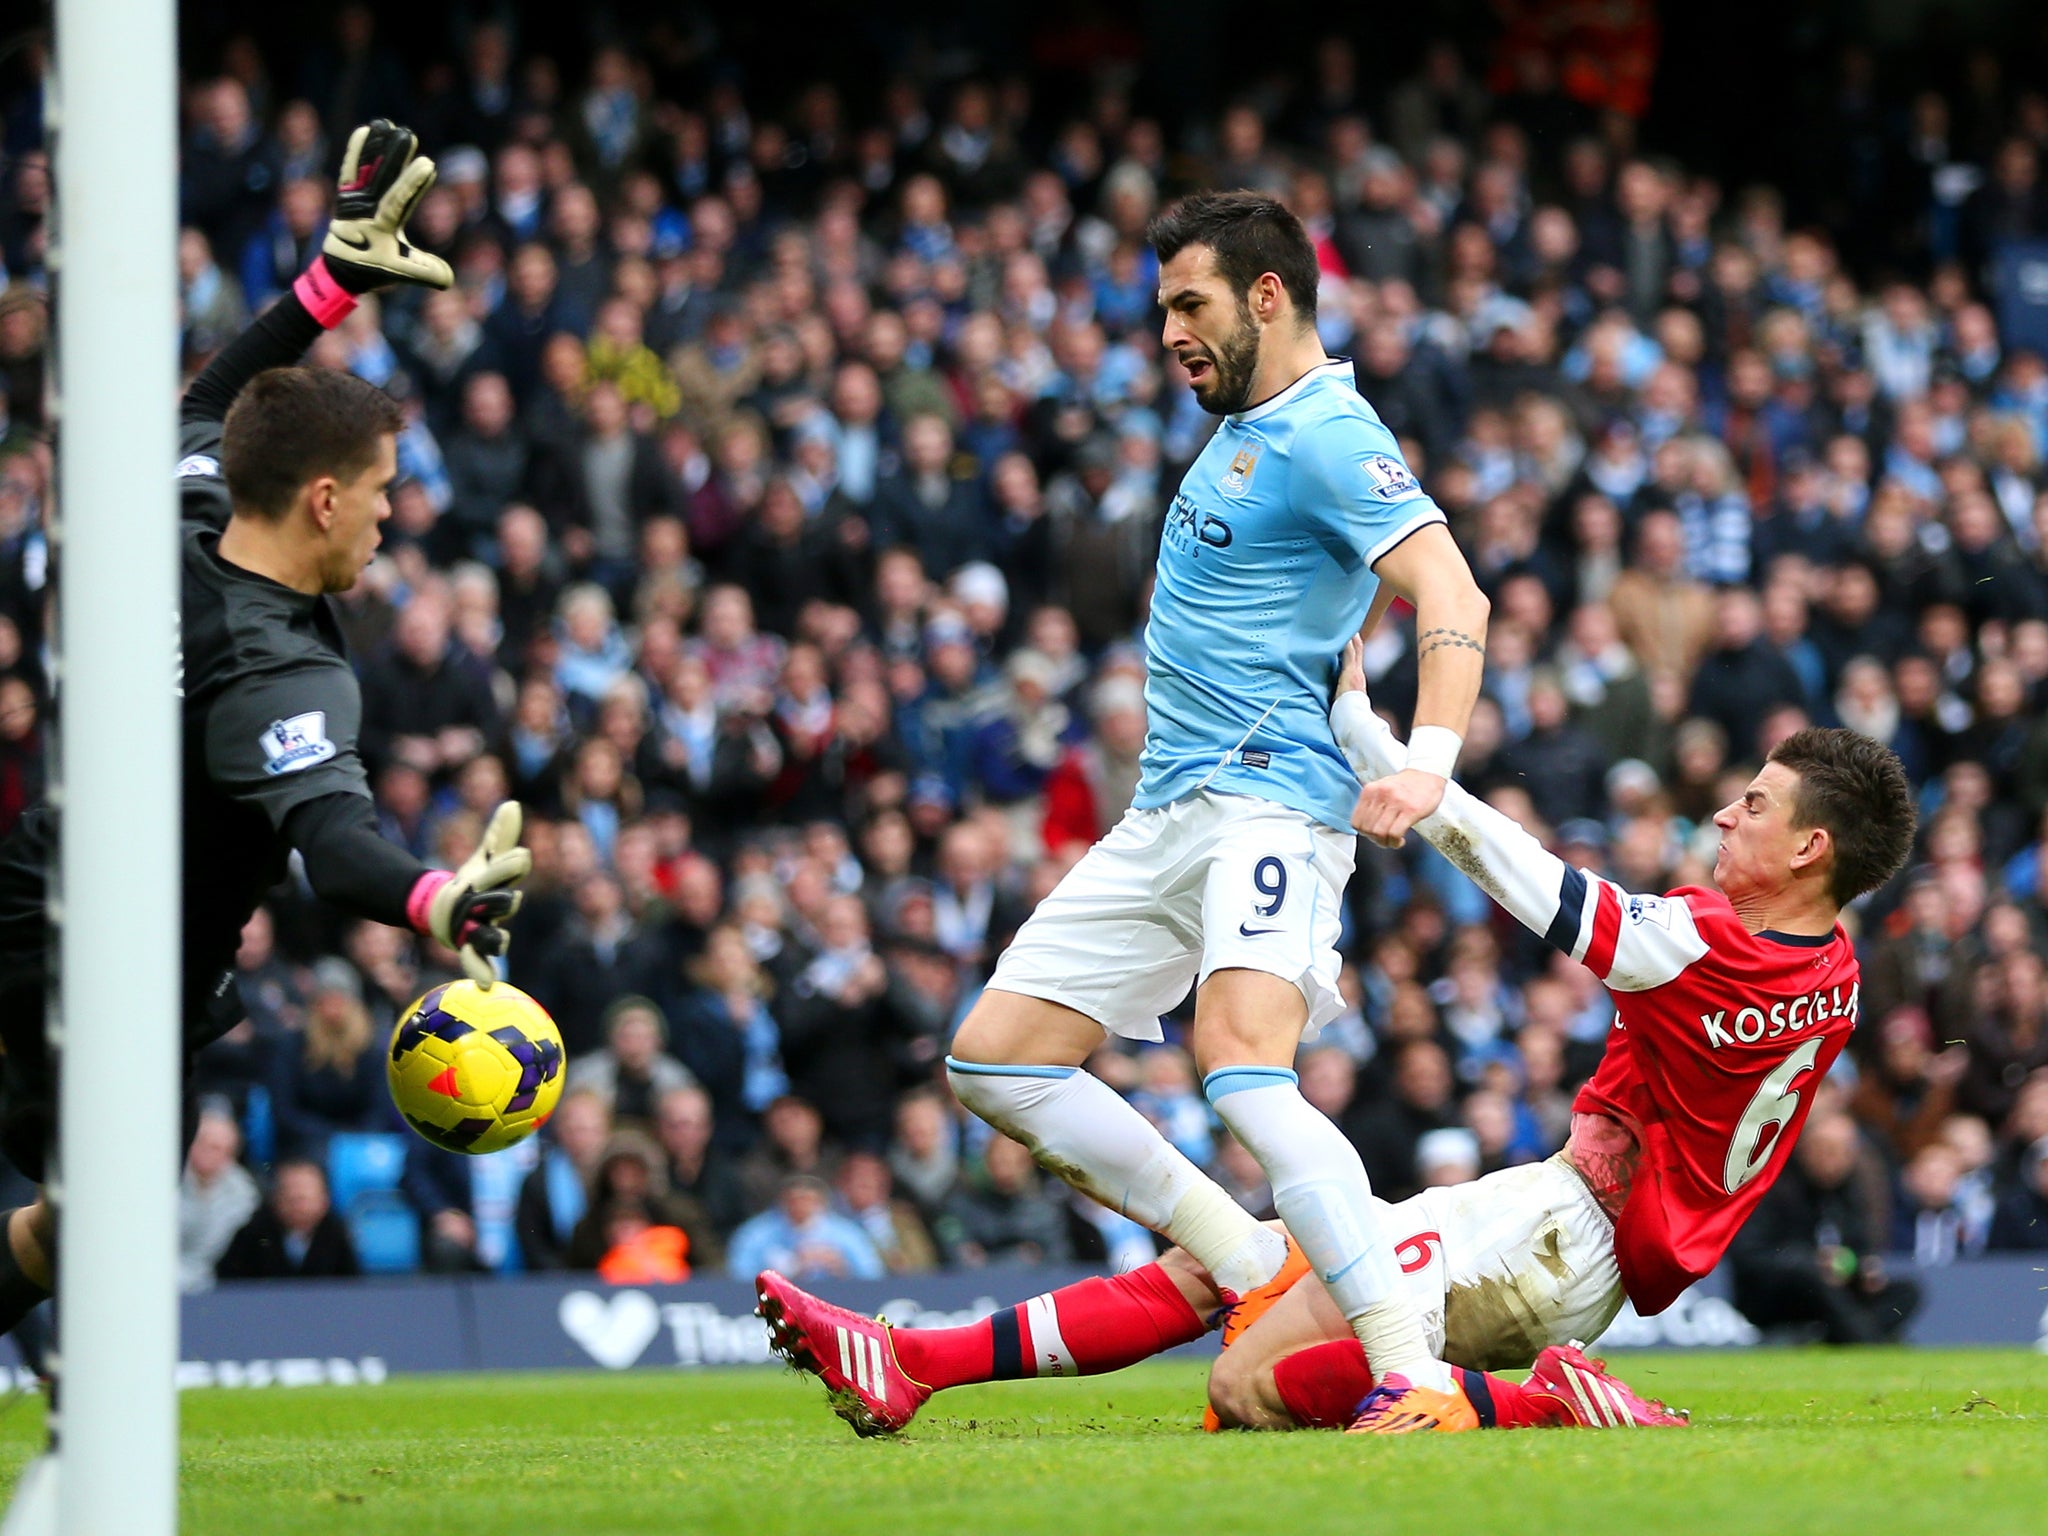 Laurent Koscielny suffered a 'deep laceration to the knee' in this collision with Alvaro Negredo